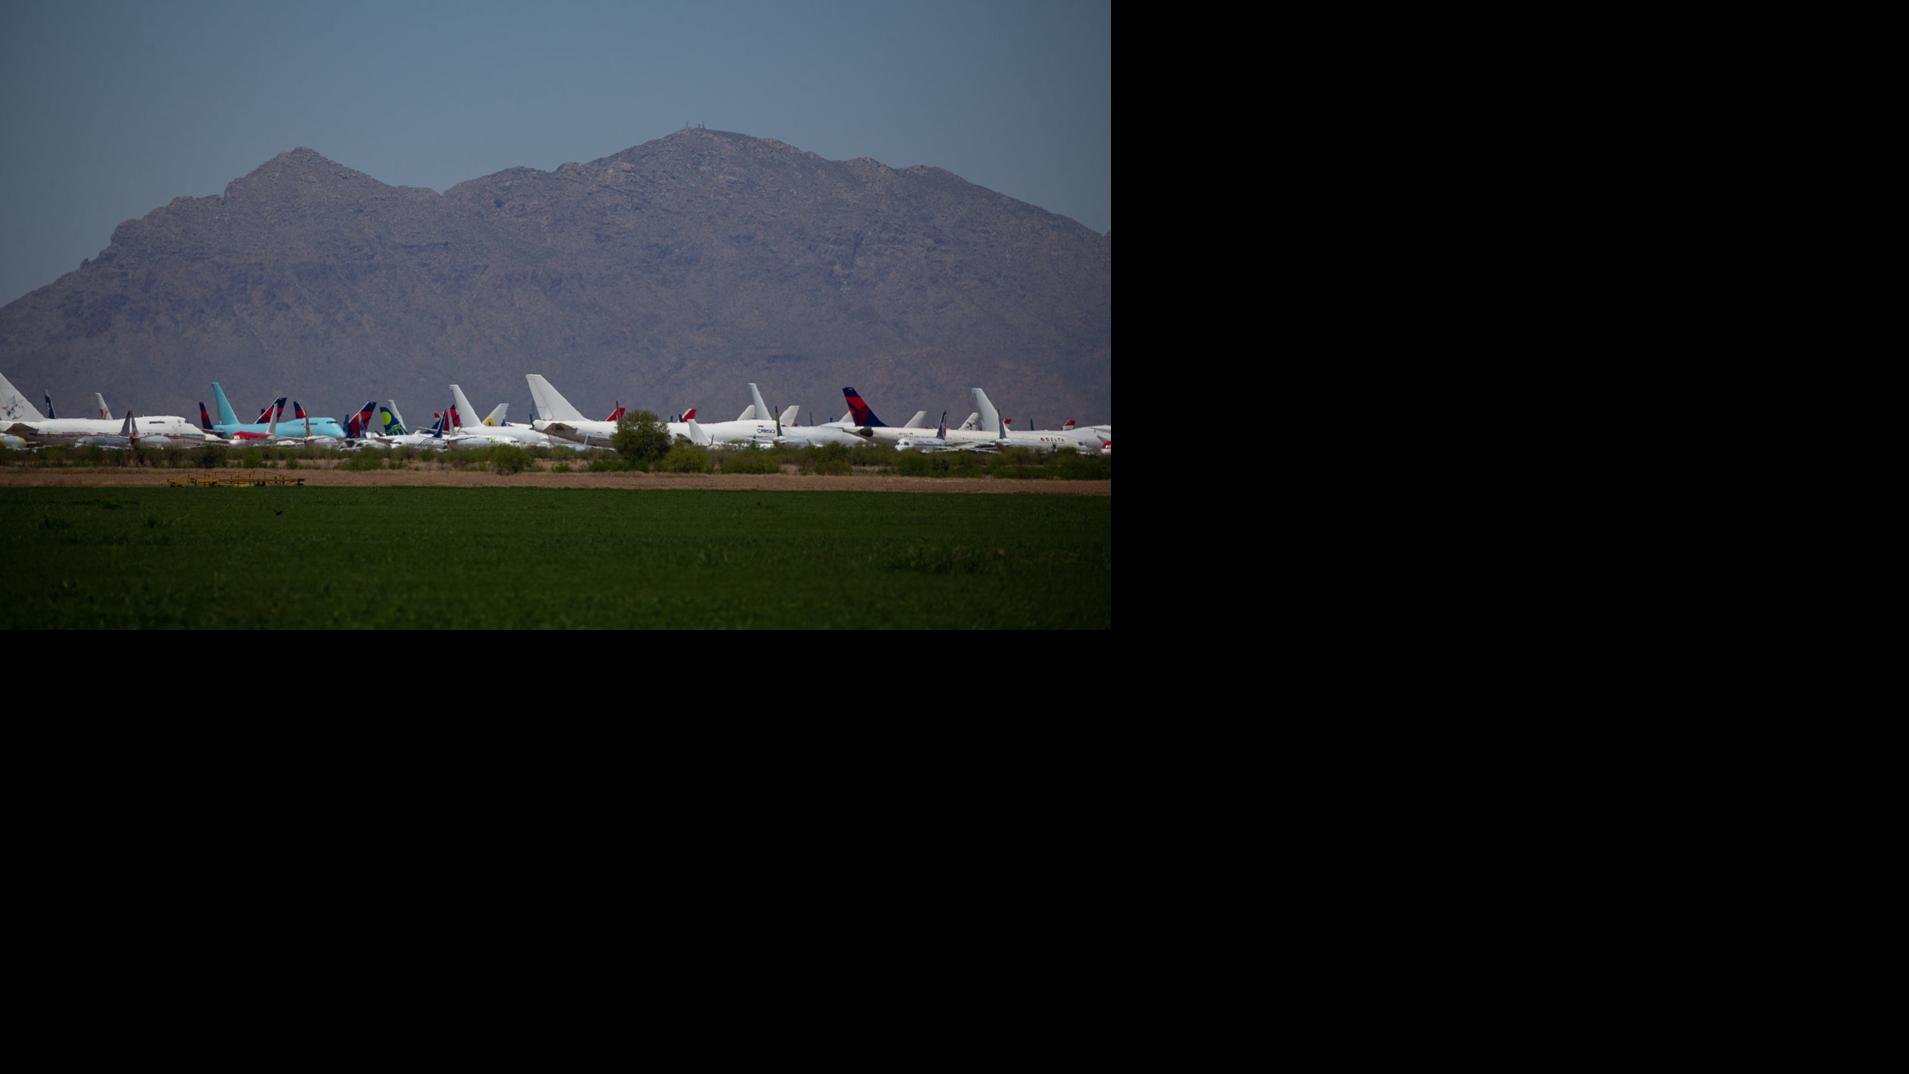 As airlines suffer, jet arrivals increase at airpark storage yard north of  Tucson